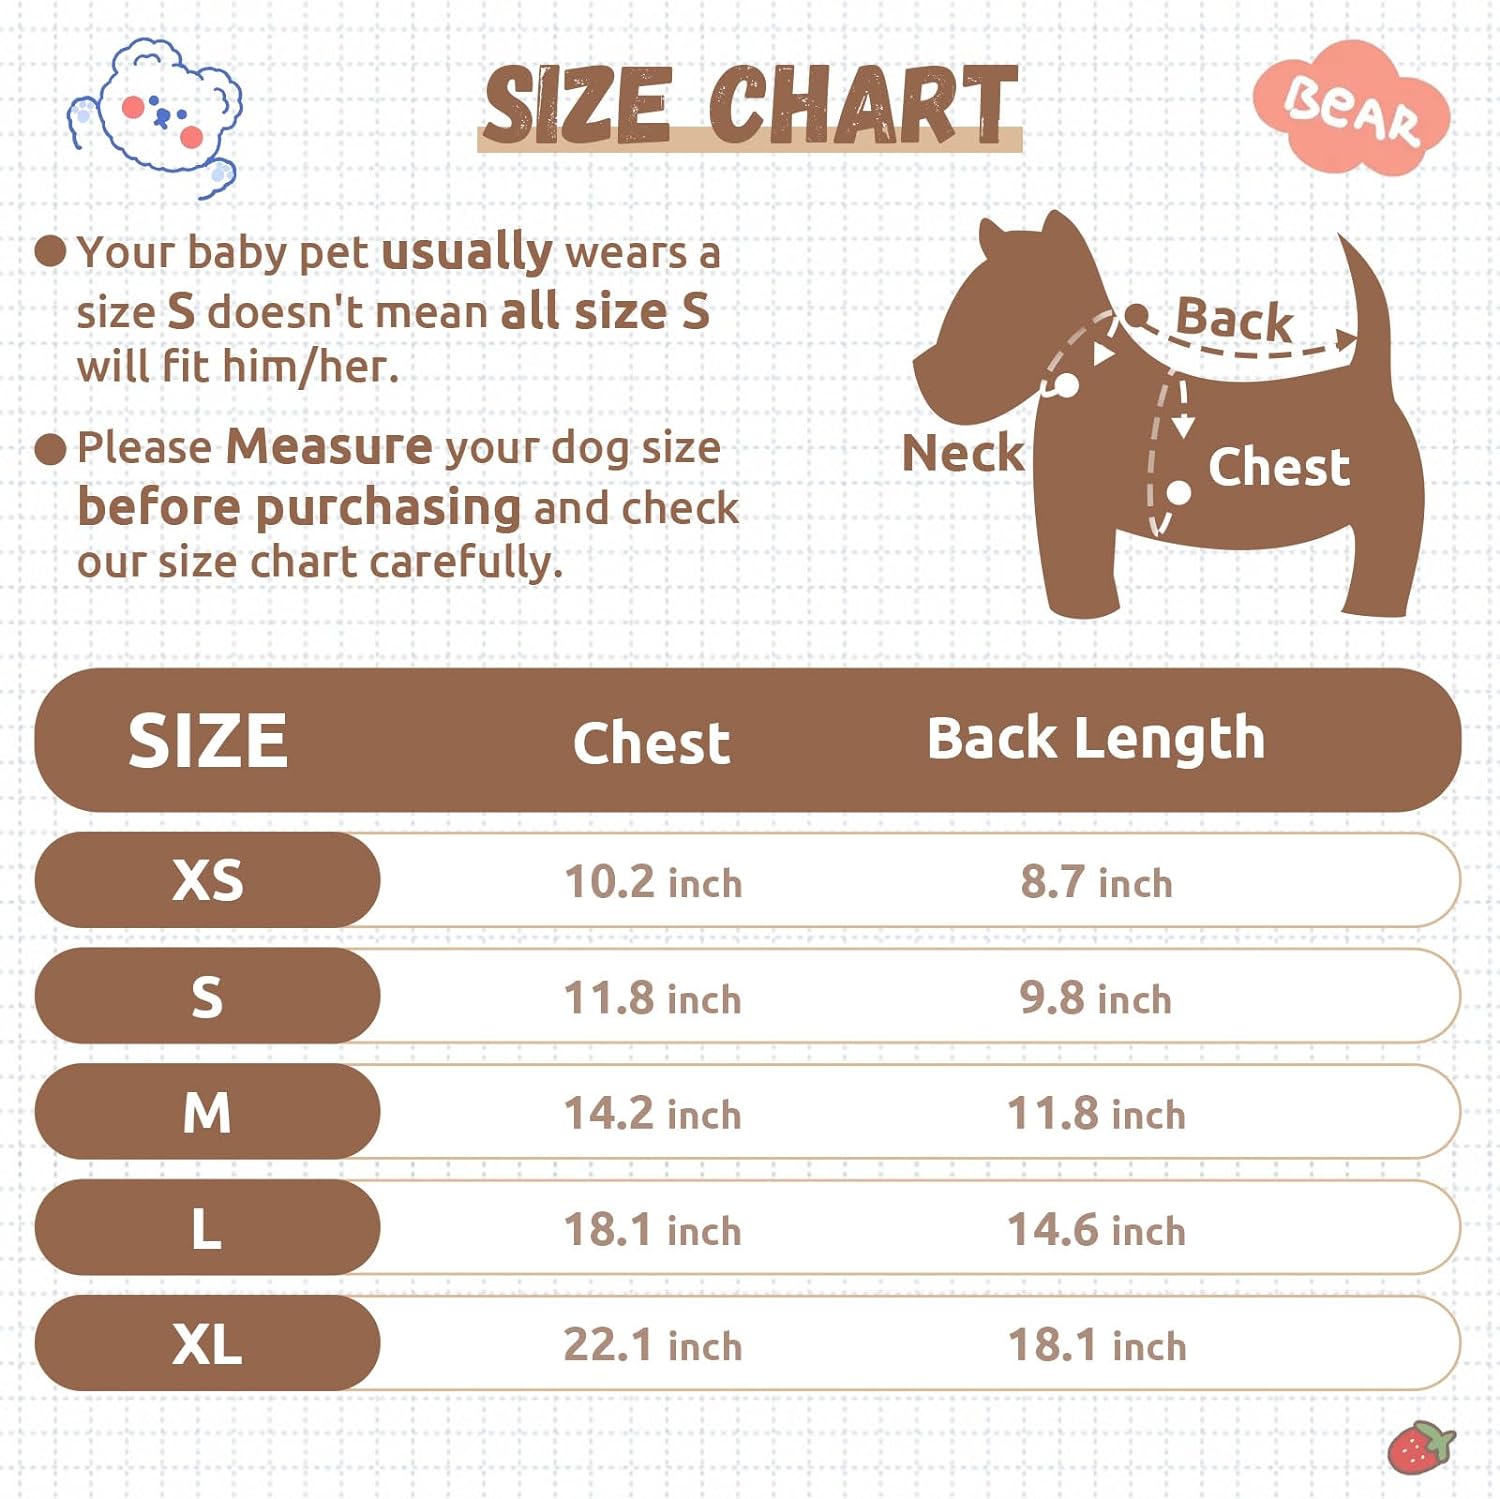 Small Dog Sweaters Cute Bear Dog Cardigans Clothes for Small Medium Dogs Boy Girl Puppy Cat Knitting Cardigan Outfits Dog Winter Coats Warm Pet Dog Clothes Soft Knitwear Apparel (Stripe,L)